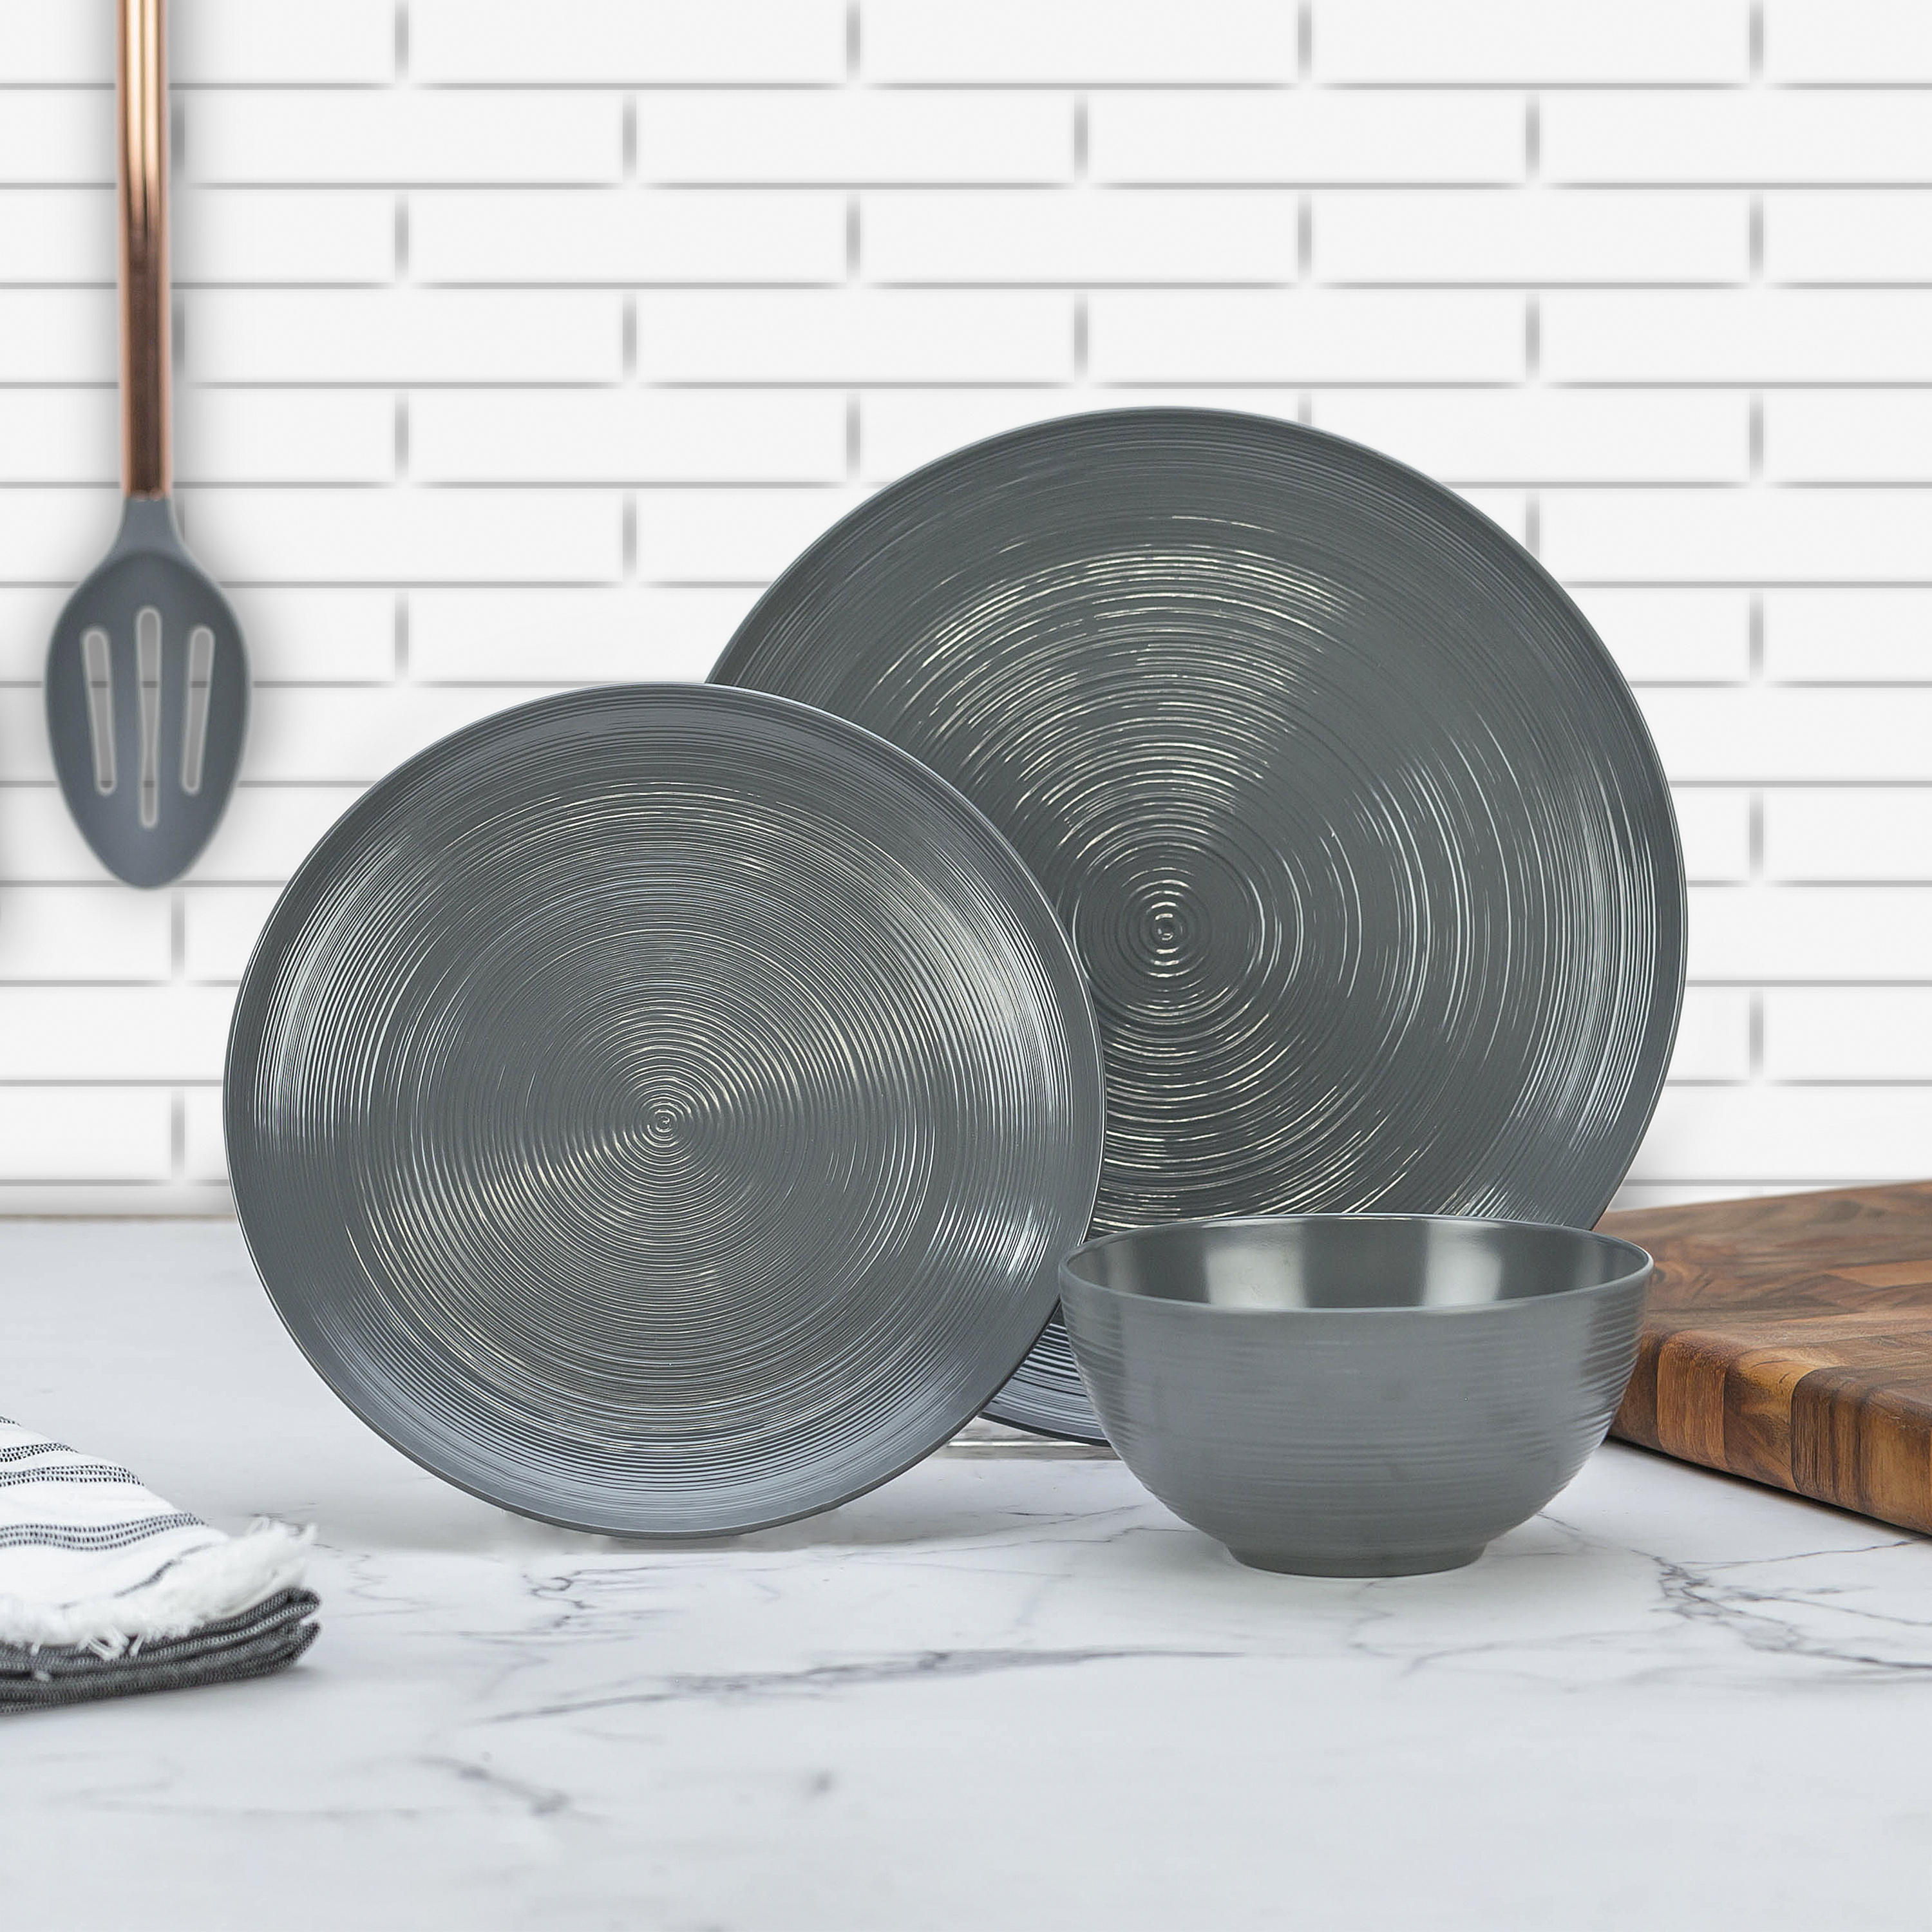 American Conventional Plate & Bowl Sets, Charcoal, 12-piece set slideshow image 11